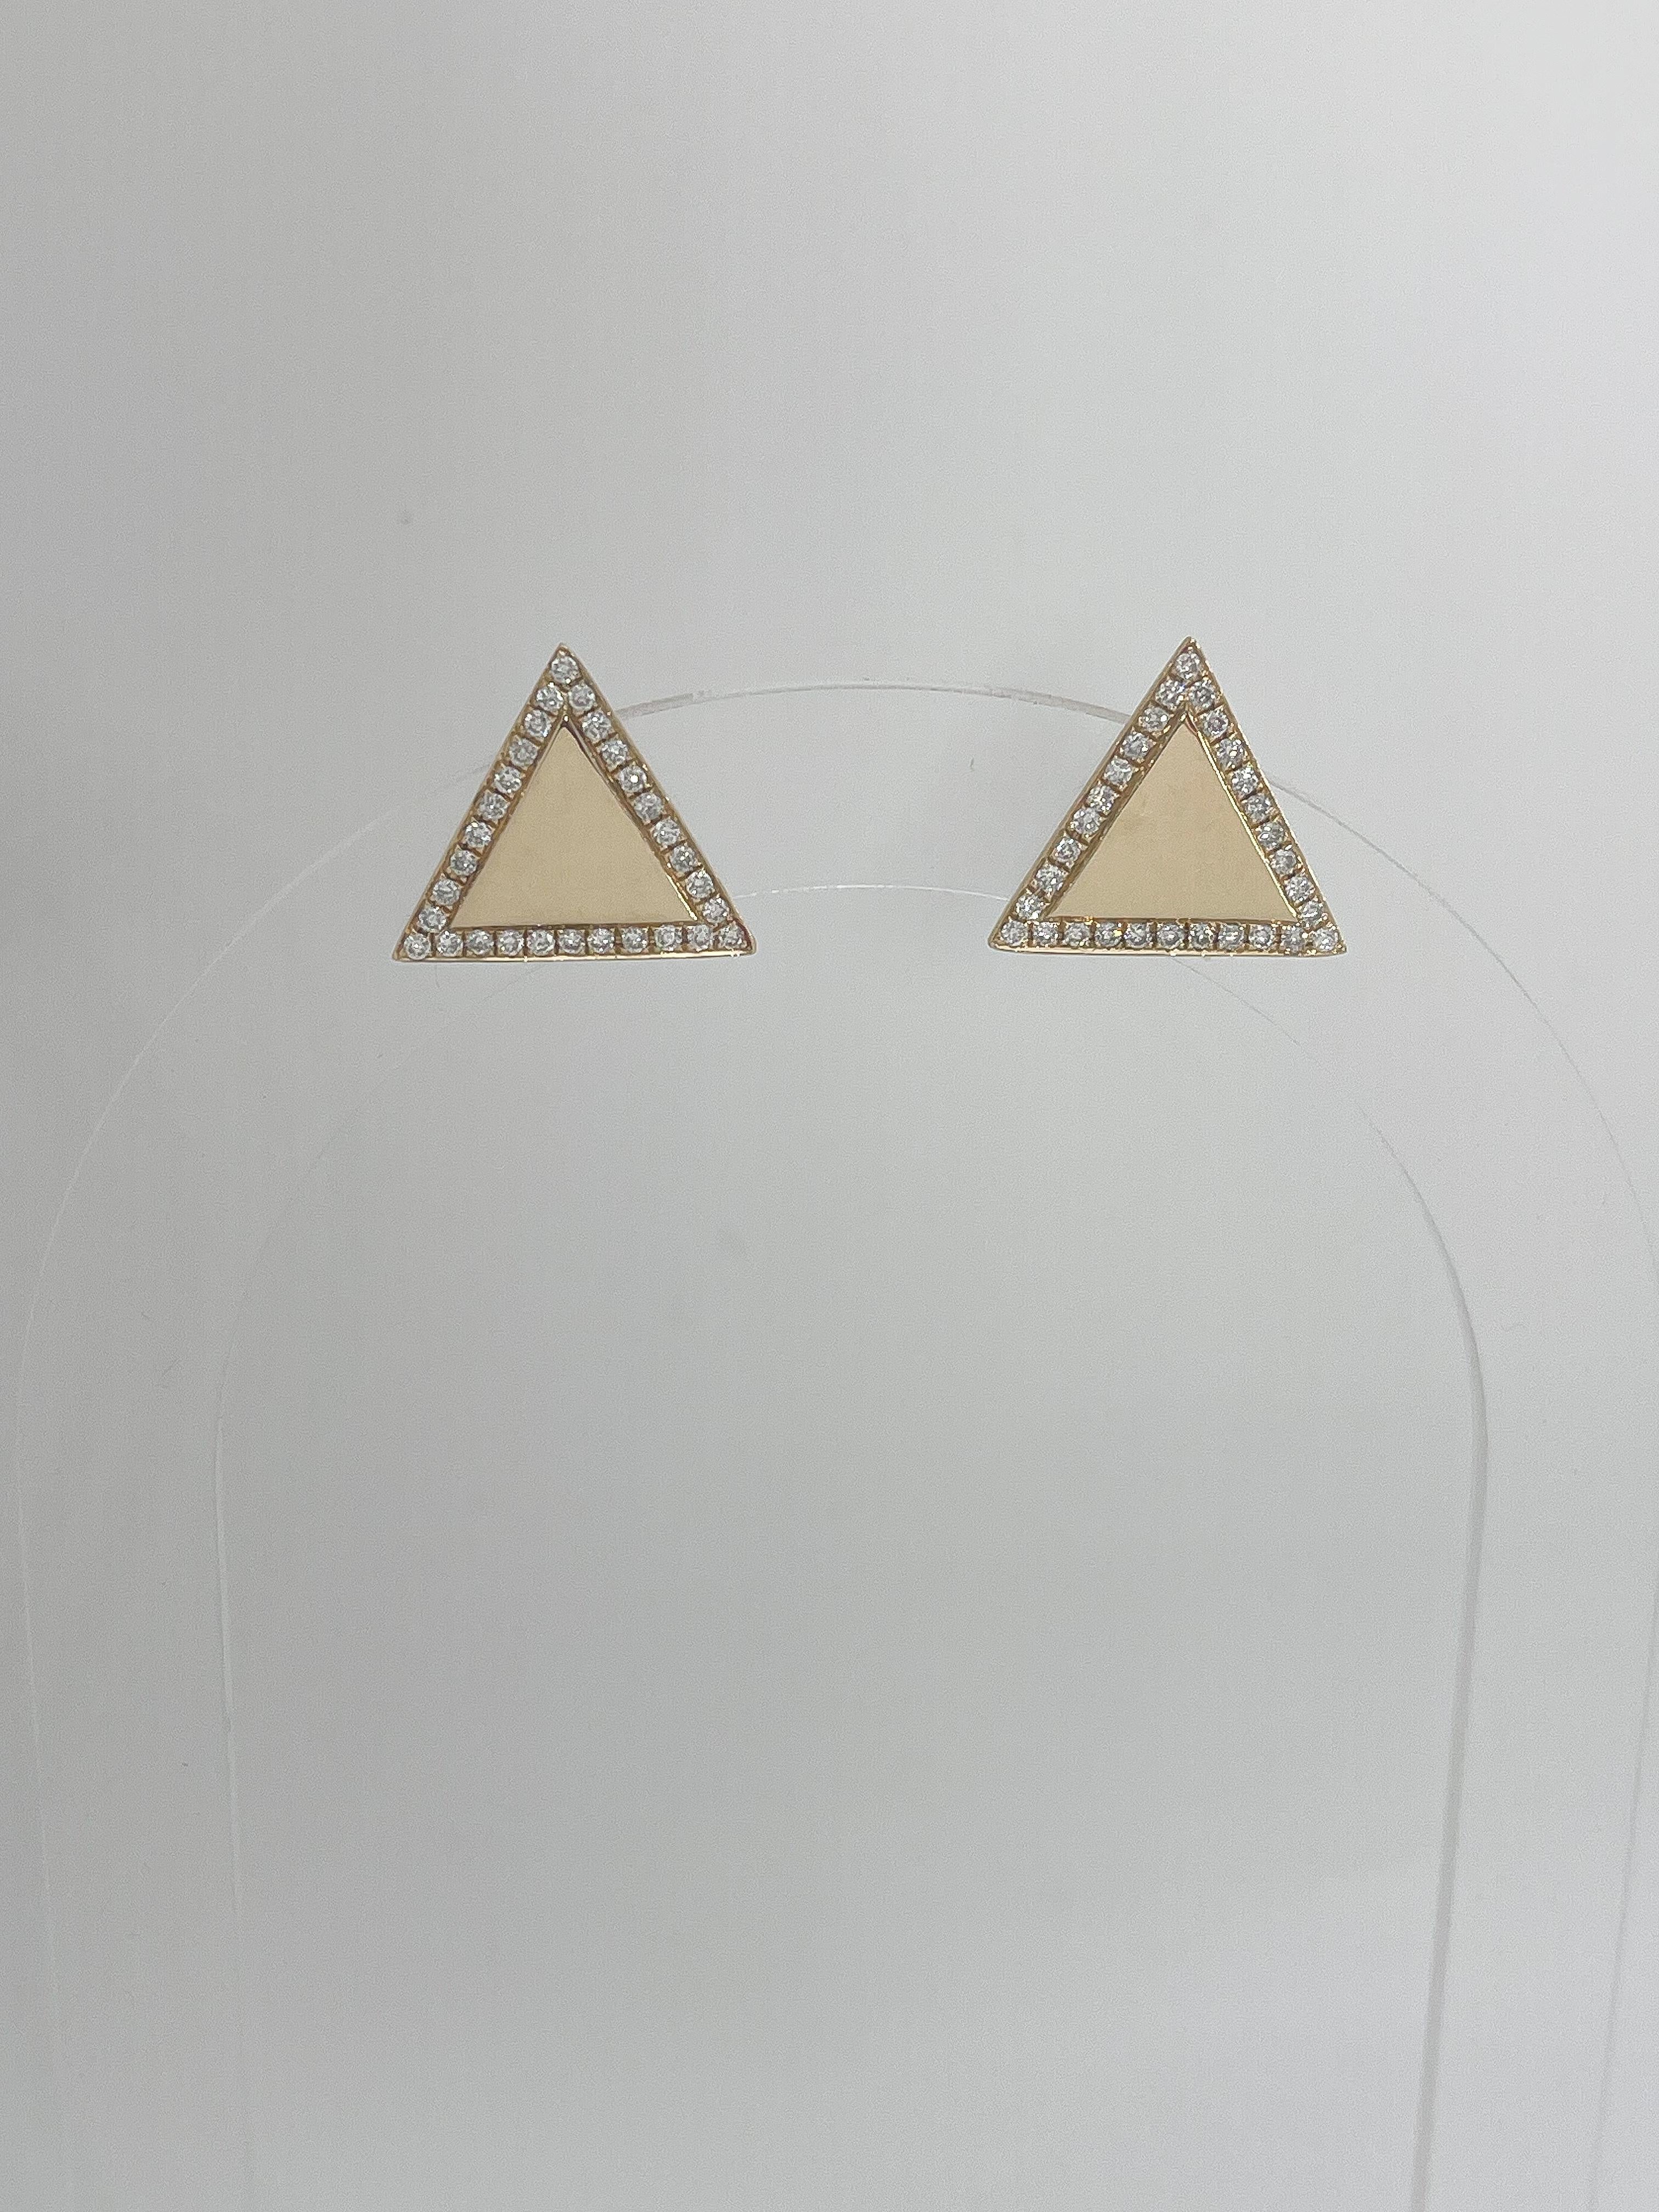 14k yellow gold .50 CTW diamond triangle shape stud earrings. The diamonds in these earrings are all round, they measure to be 16.7mm x 14.7mm, they have a friction back to close, and they have a total weight of 3.3 grams. 